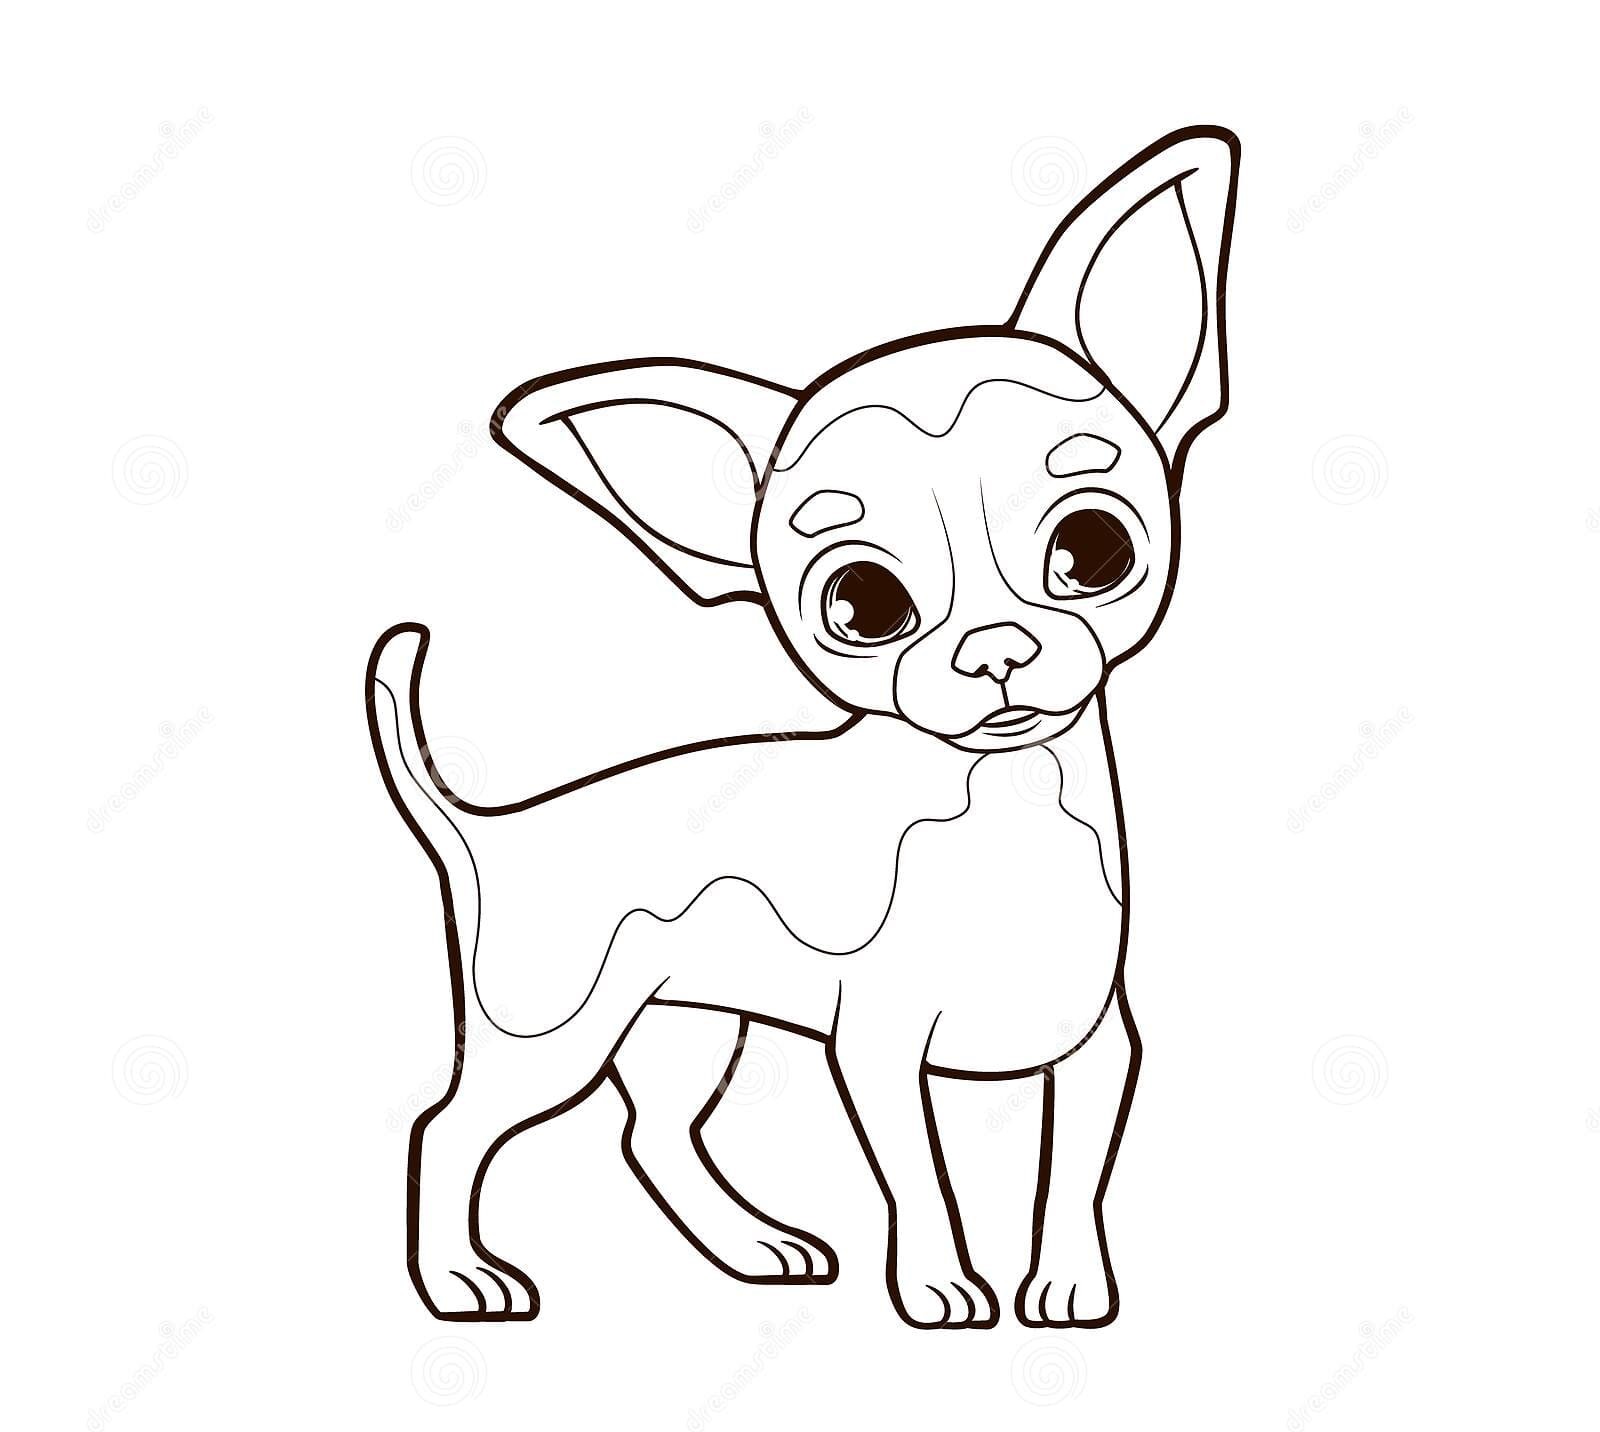 Little Funny Chihuahua Dog With Big Ears Stands On Thin Paws Coloring Page